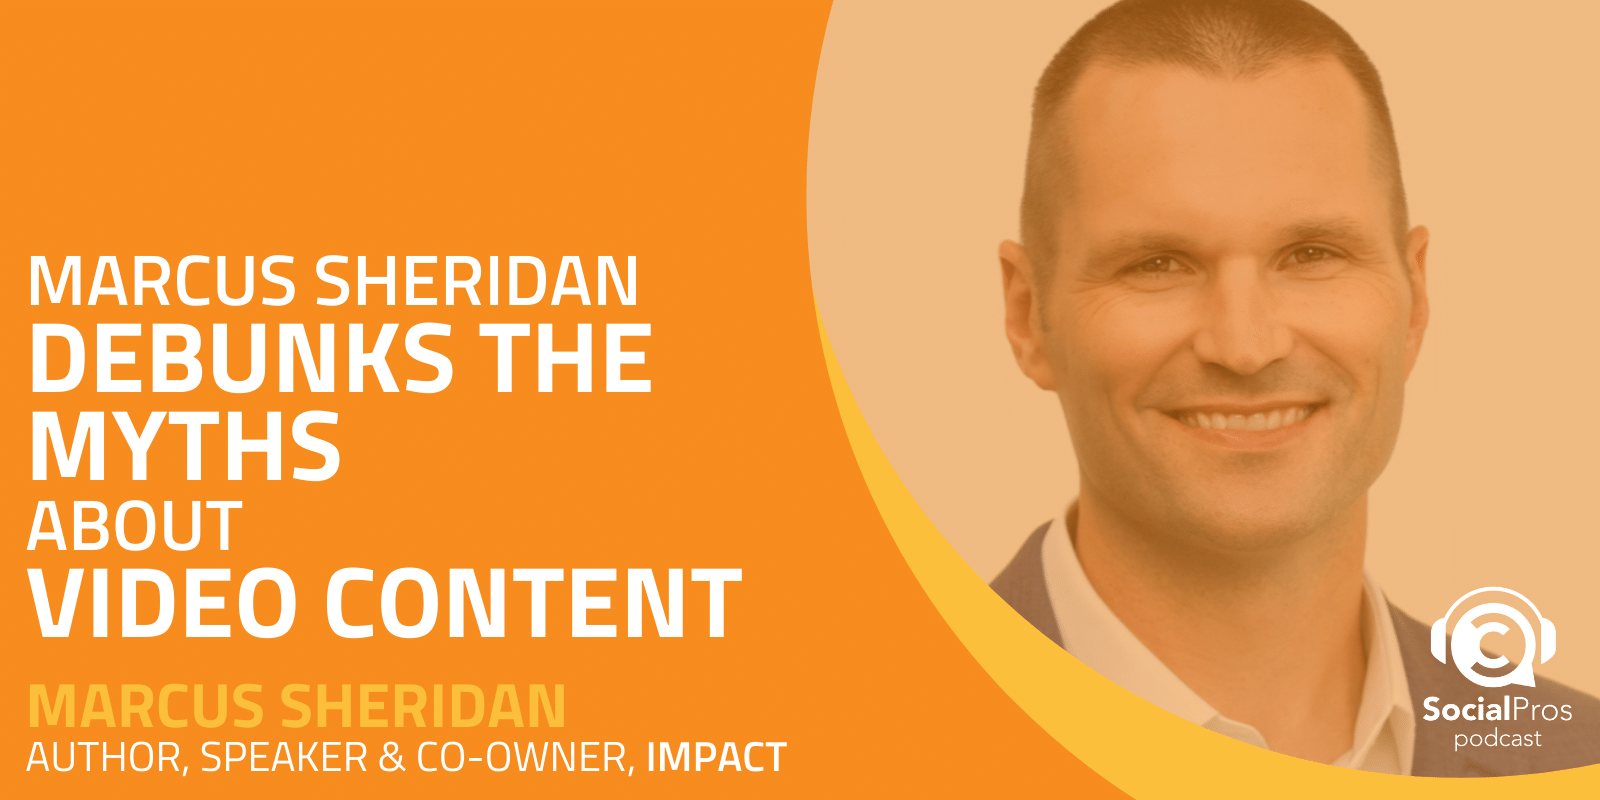 Marcus Sheridan Debunks the Myths About Video Content